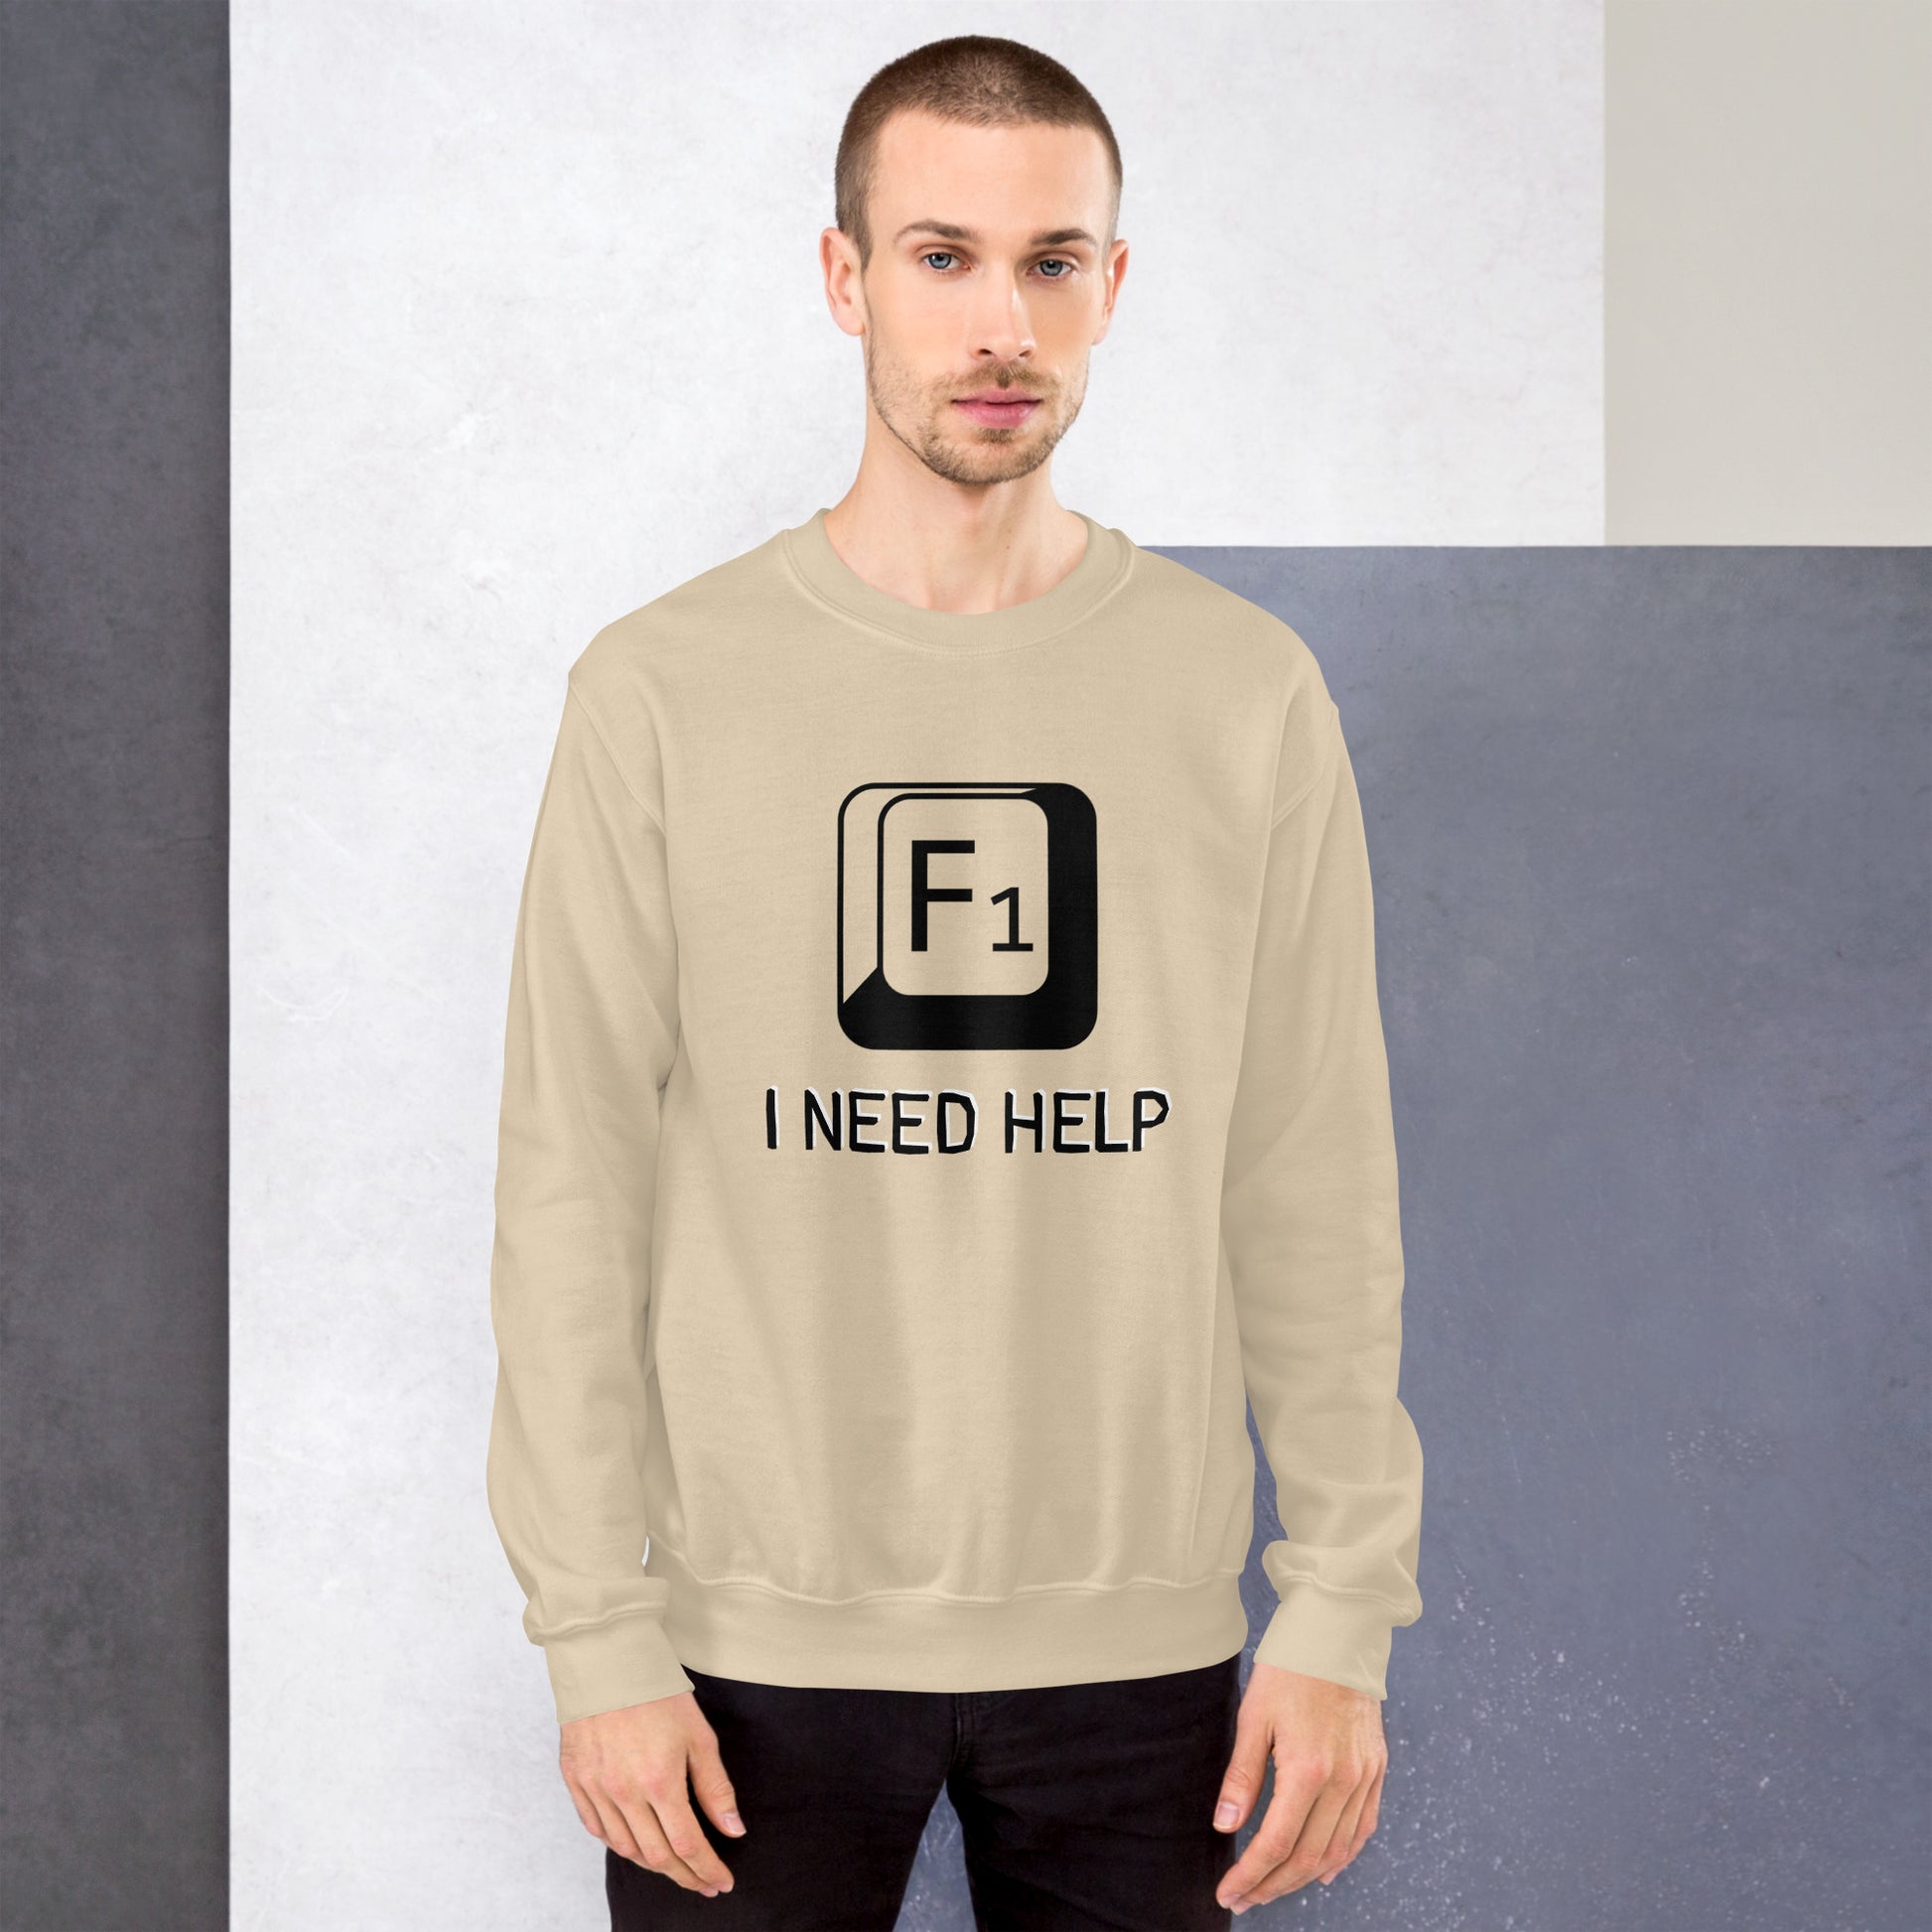 Men with sand sweatshirt and a picture of F1 key with text "I need help"